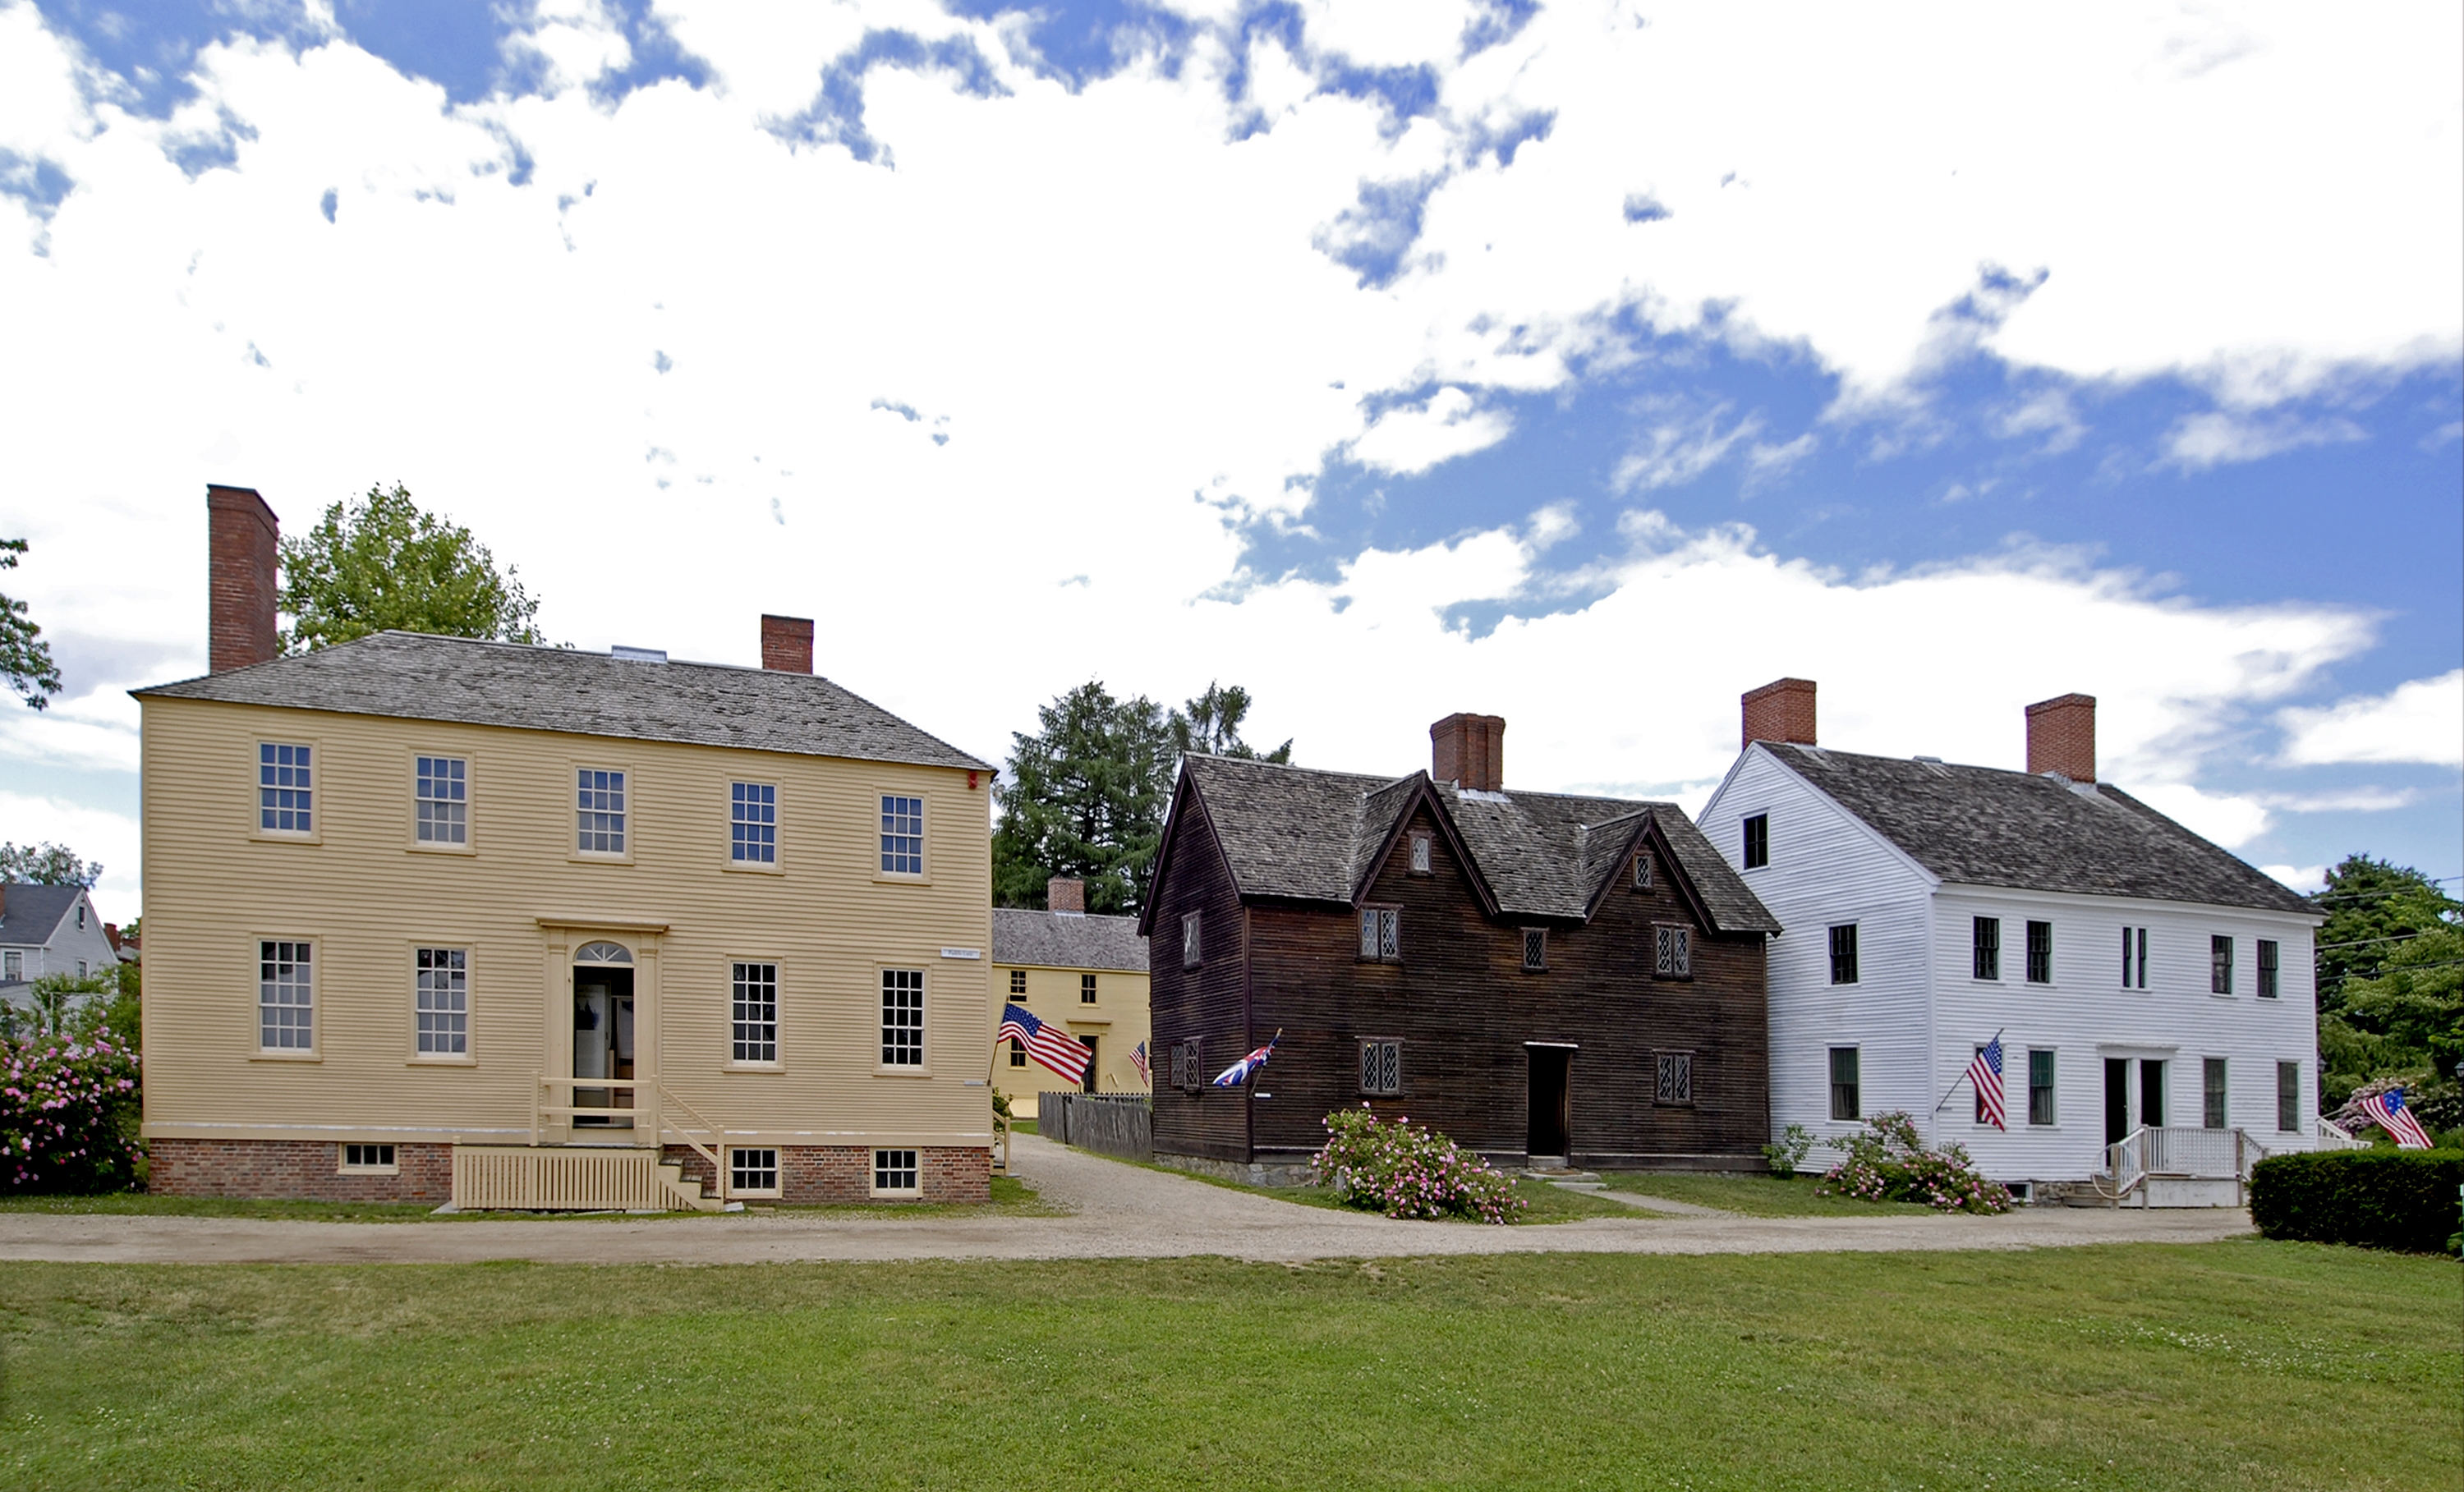 Strawbery Banke Museum, located in downtown Portsmouth, New Hampshire, tells the story of the neighborhood of Puddle Dock.